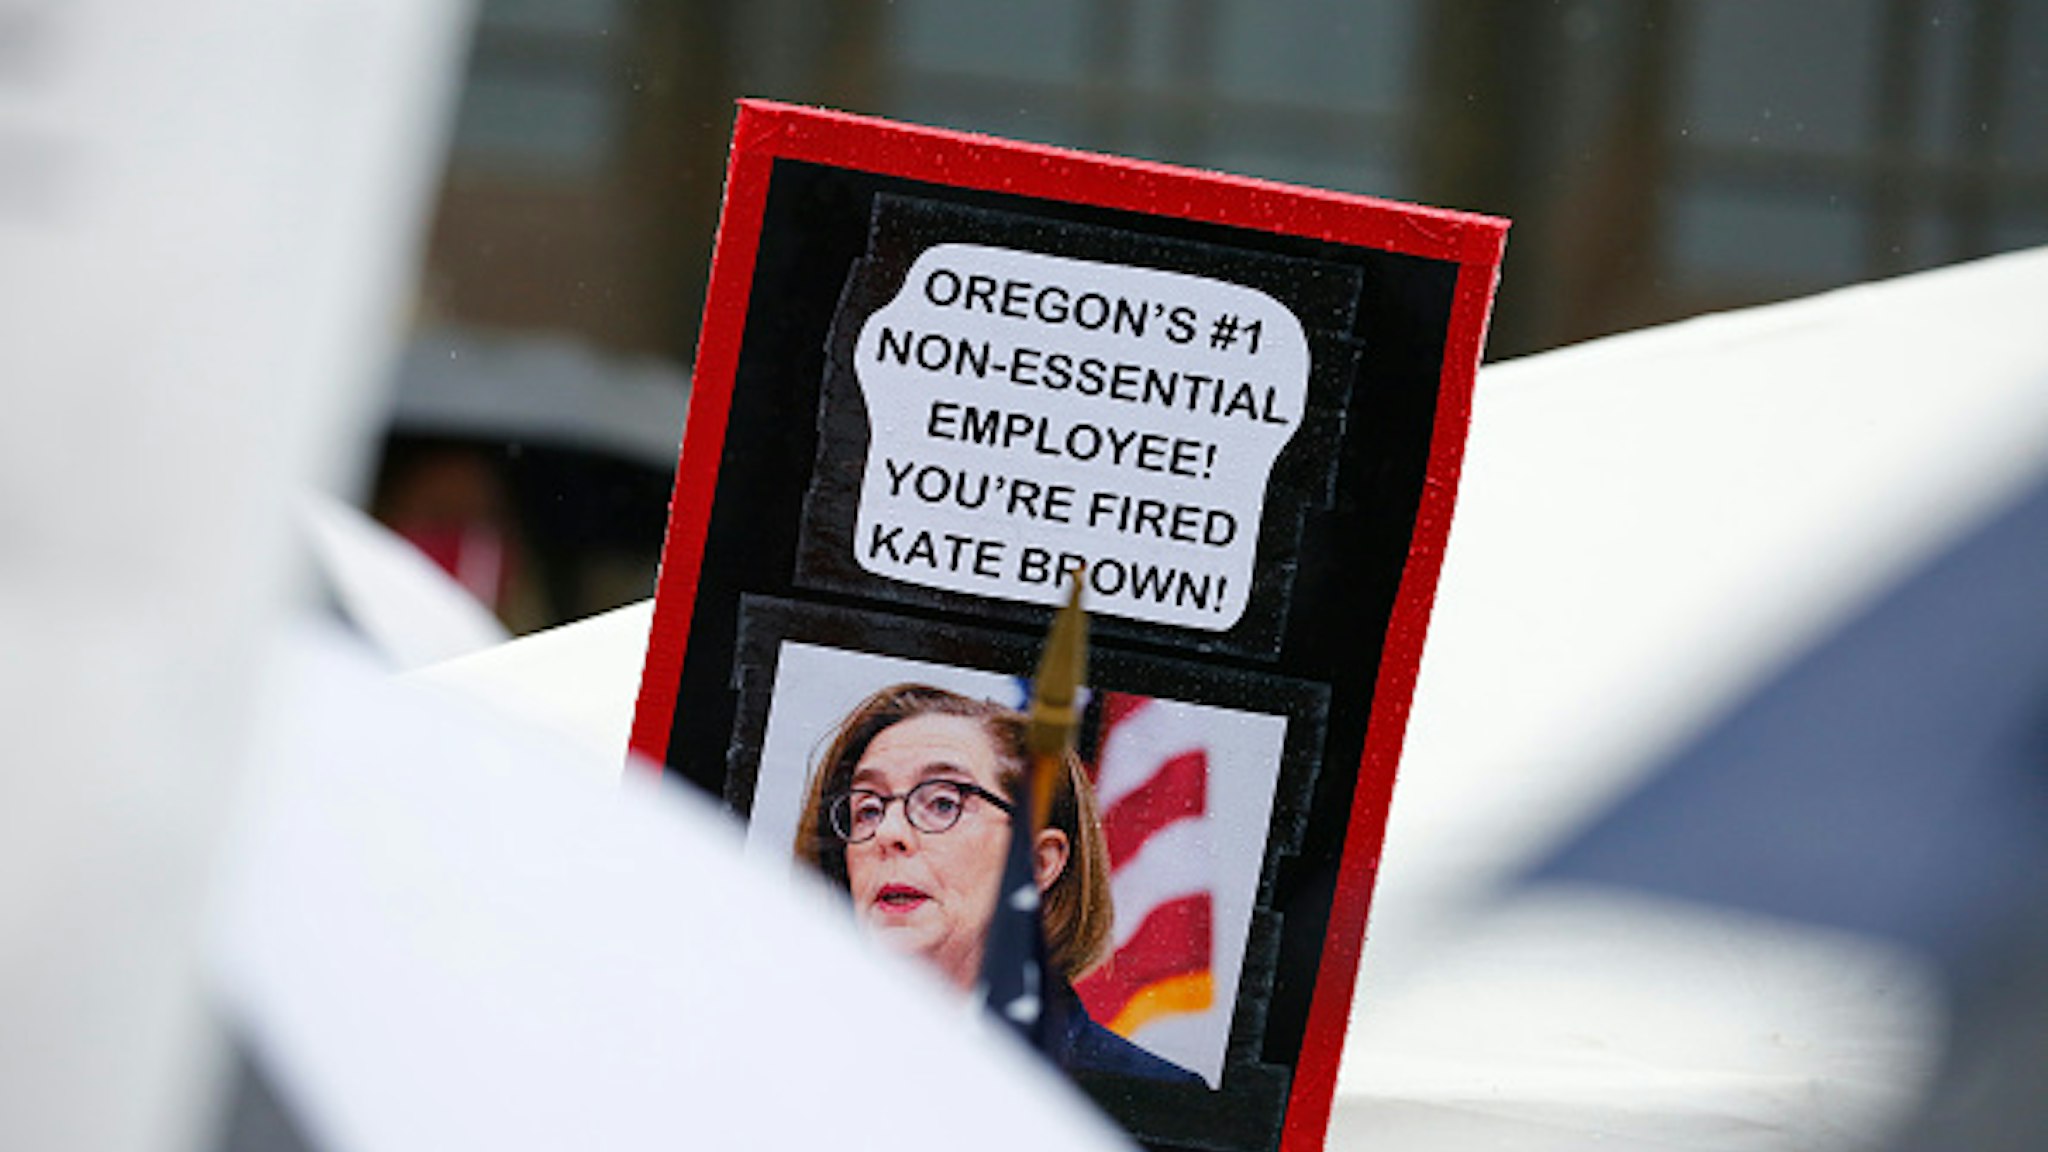 SALEM, OR - MAY 02: A sign criticizing Oregon Governor Kate Brown is seen at the ReOpen Oregon Rally on May 2, 2020 in Salem, Oregon. Demonstrators gathered at the state capitol to demand a reopening of the state and to protest Gov. Kate Brown's stay-at-home order which was put in place to slow the spread of the coronavirus